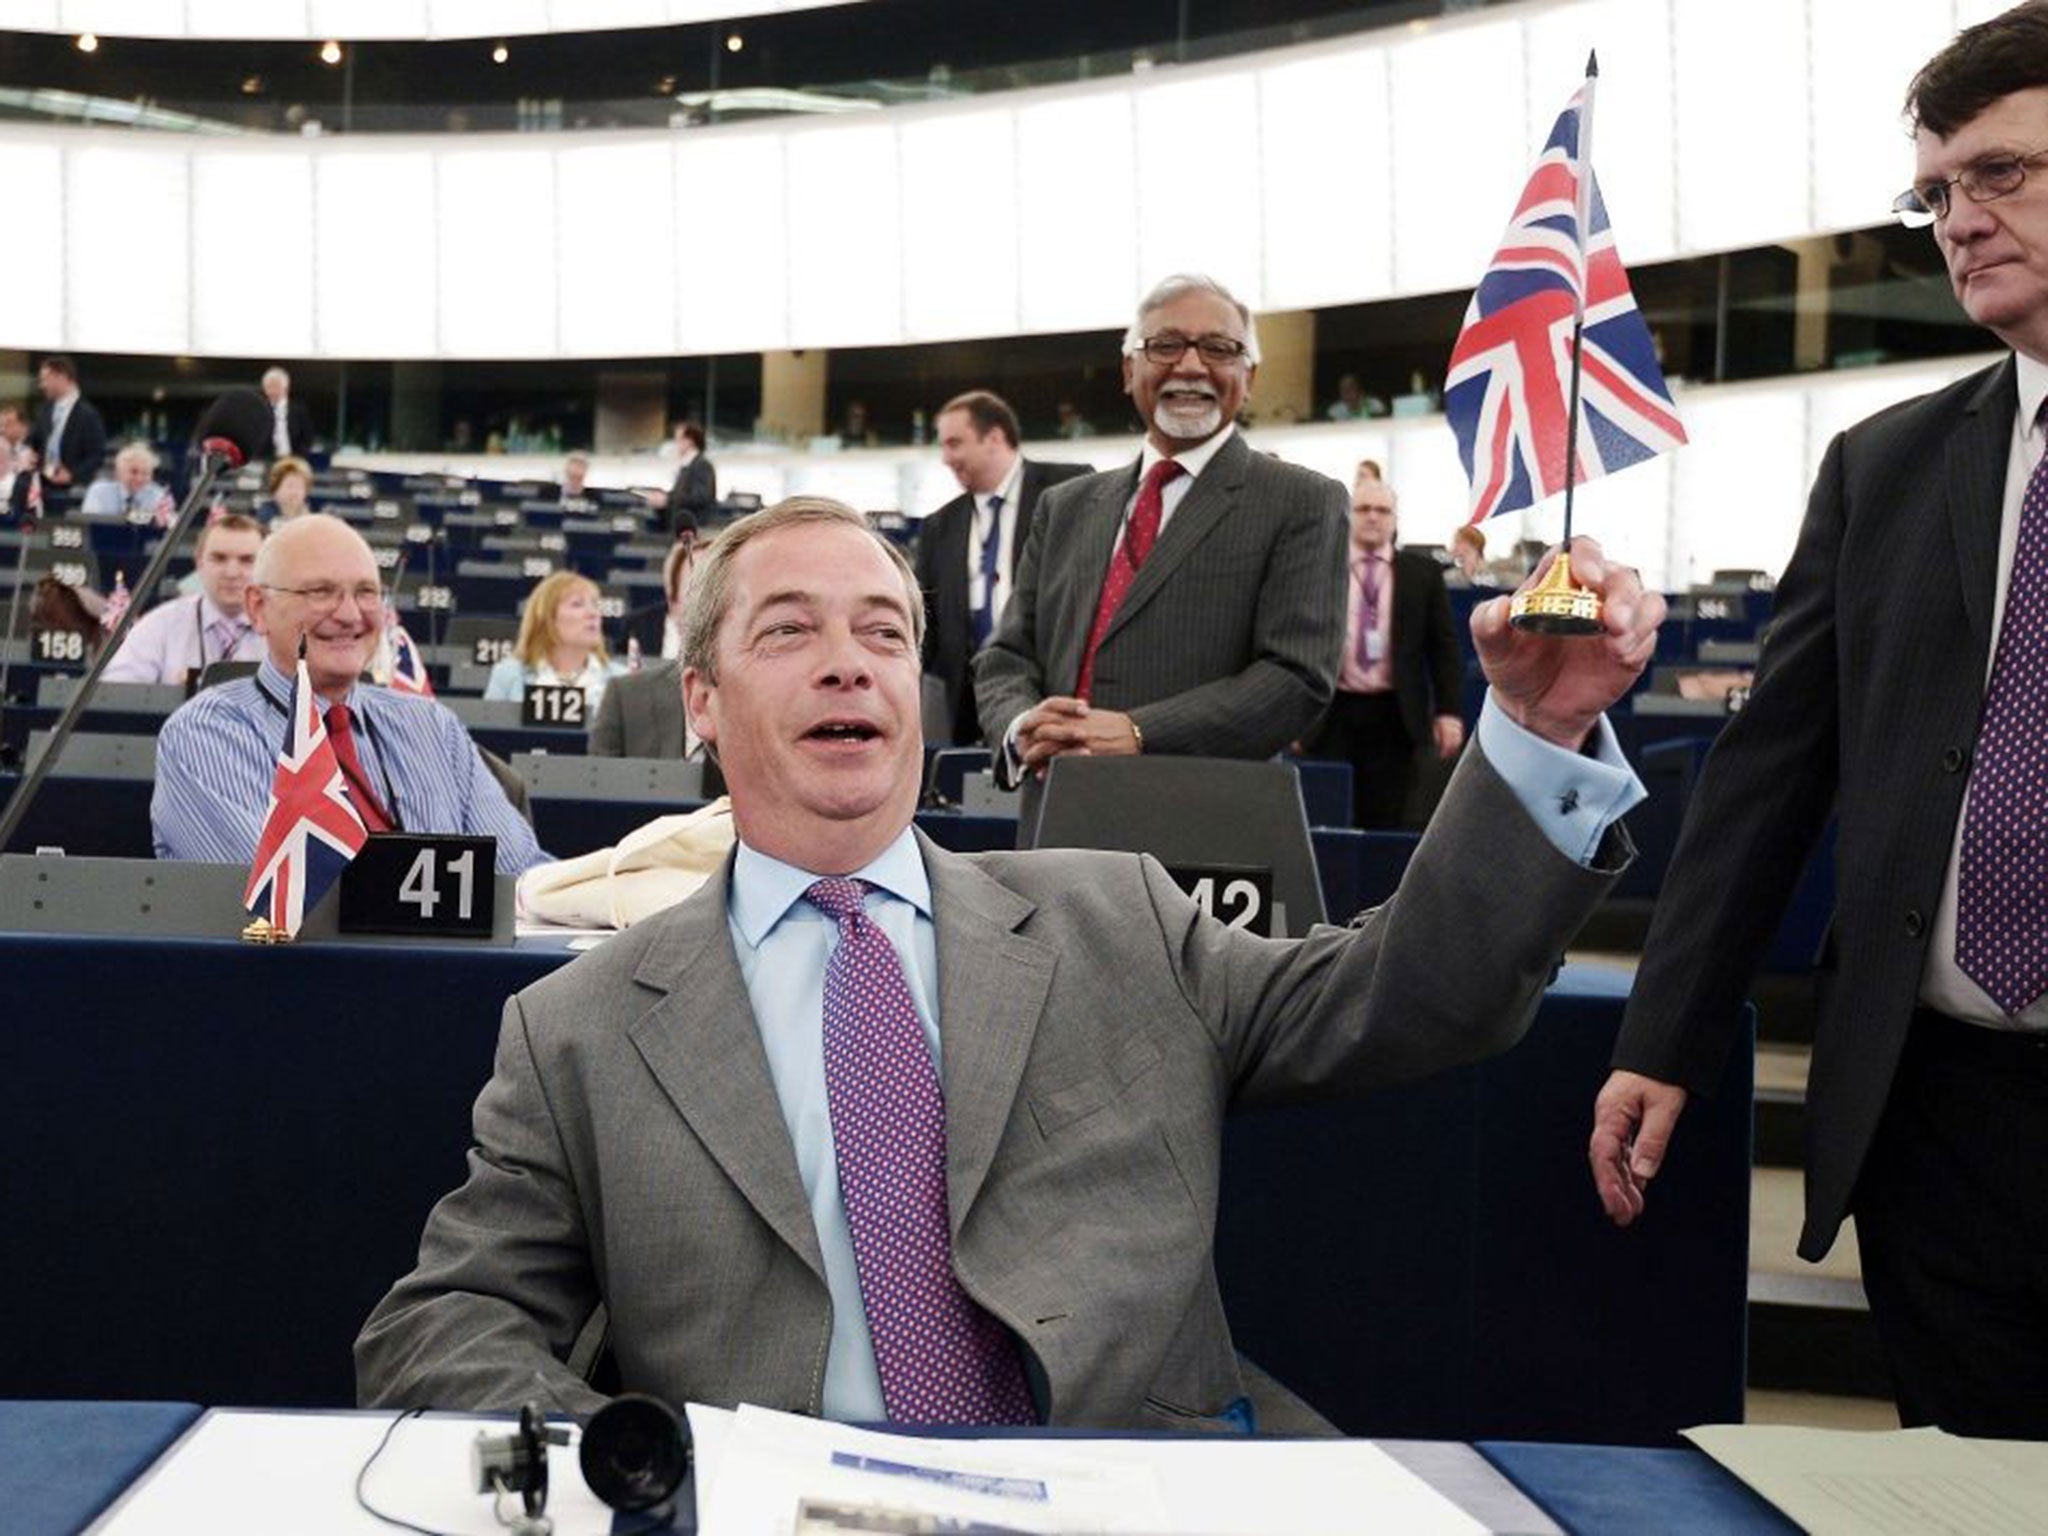 Ukip topped the poll in this year's European elections